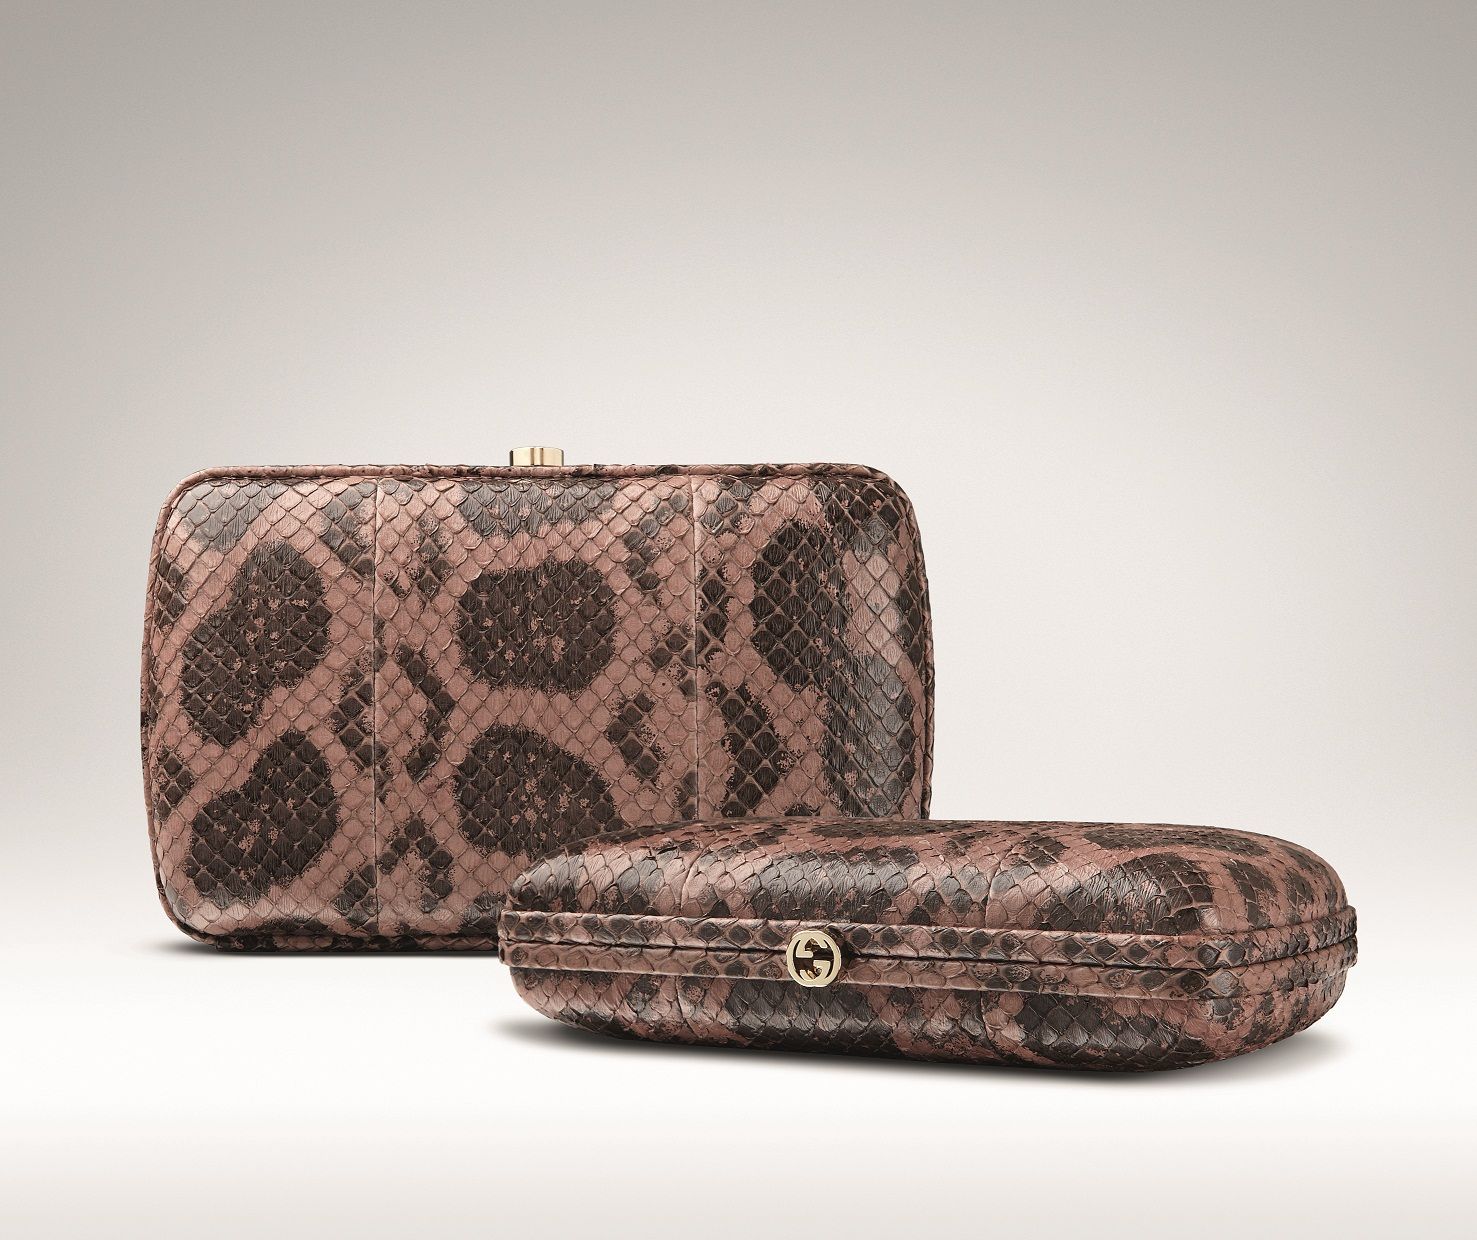 Gucci's limited edition 'exotic pink tan' anaconda skin clutch for the Gurgaon flagship store (Photo courtesy | Gucci)